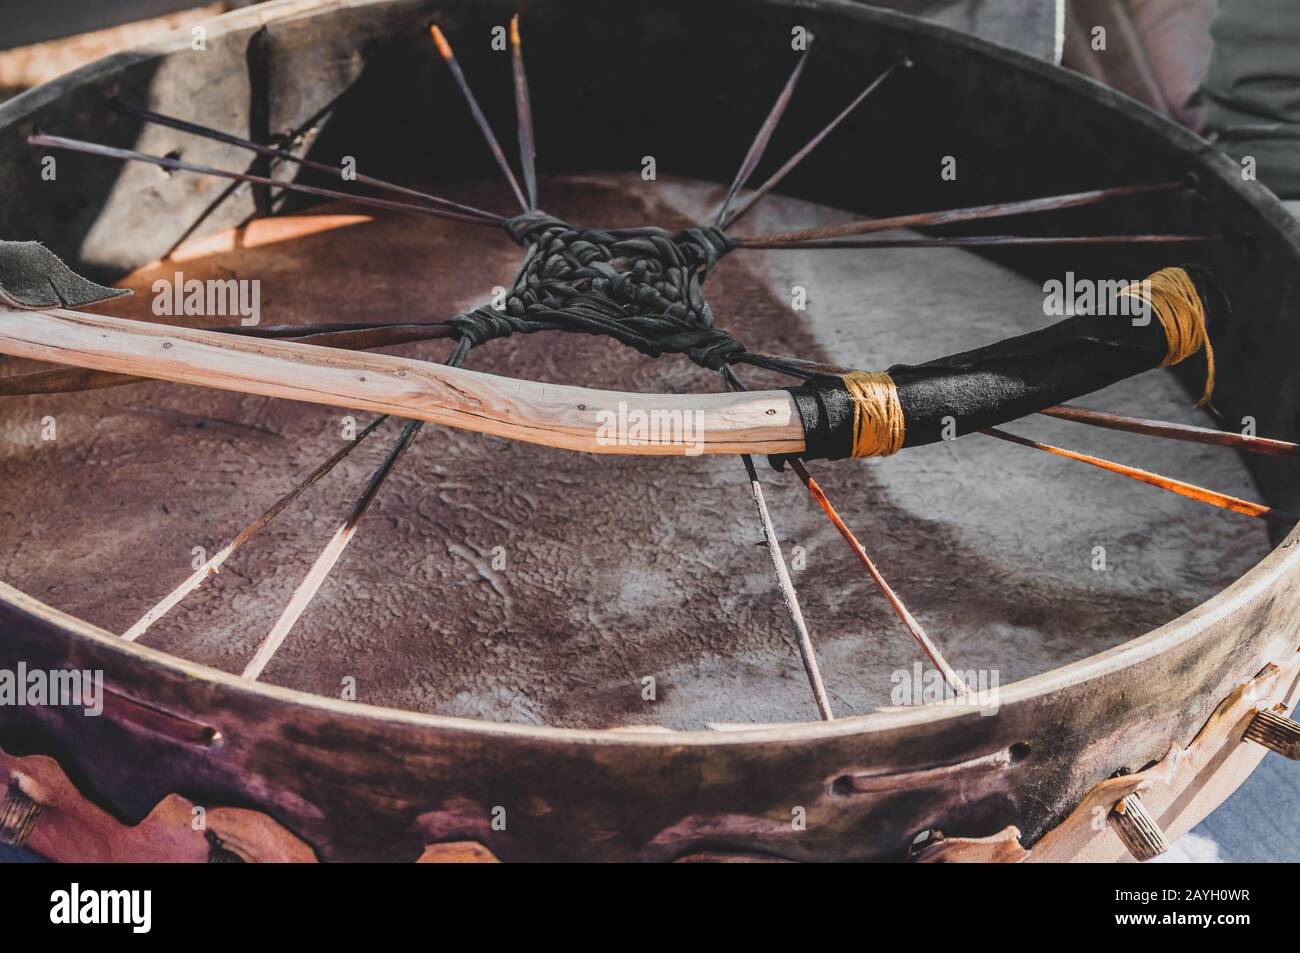 Closeup detail of a shamanic spiritual meditation ritual leather drum with a natural handmade wild wood branch drumstick for a shamanism ceremoni Stock Photo